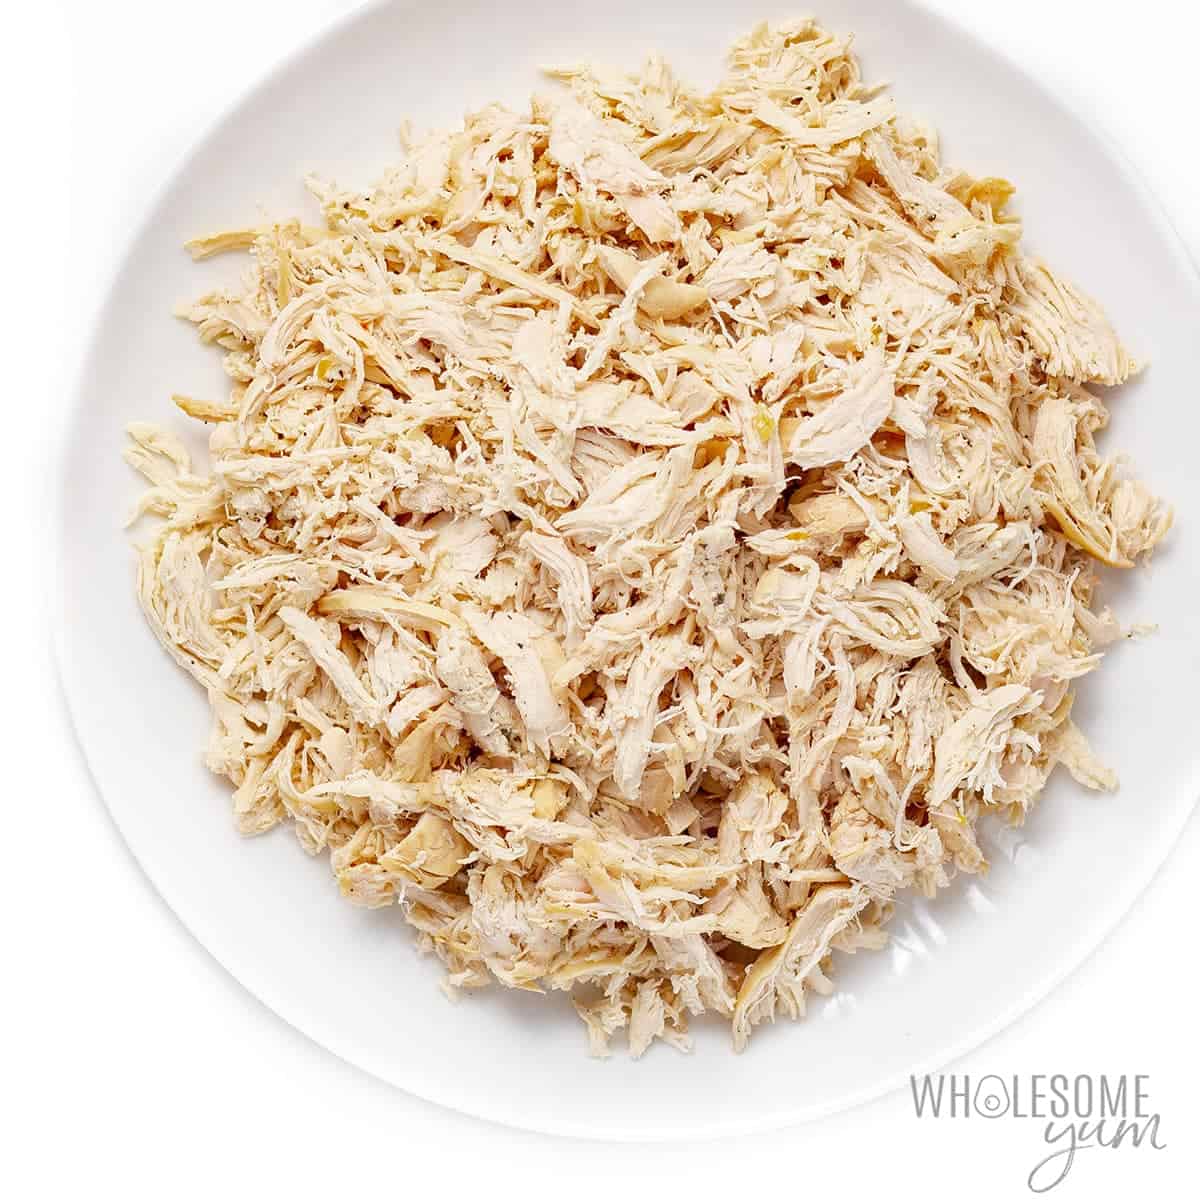 Shredded chicken on a plate